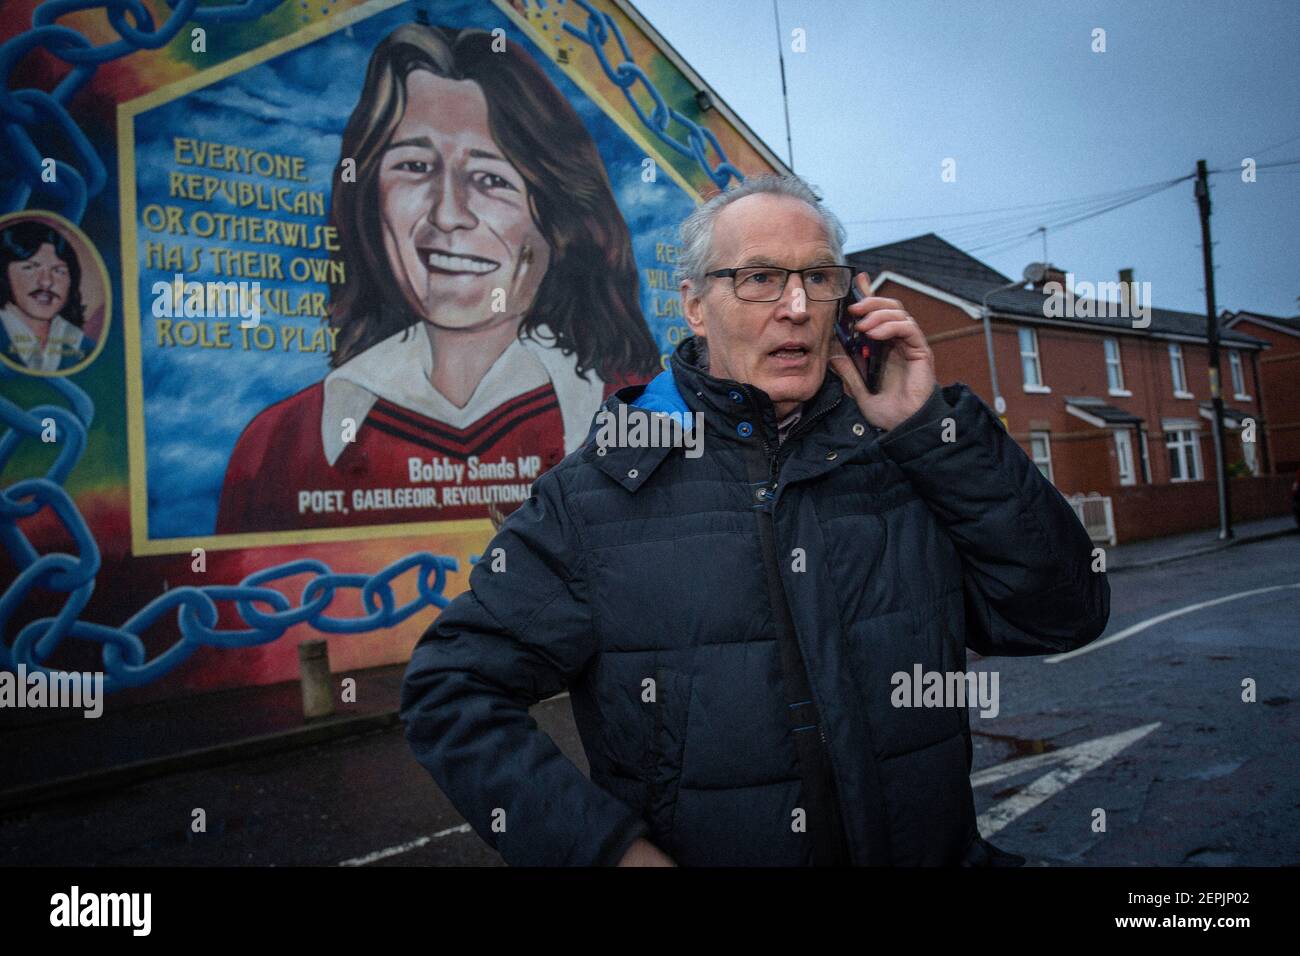 BELFAST, NORTHERN IRELAND - February, 23 Gerry Kelly in front of the Bobby Sands mural  at Sinn Fein headquarters  receive call  regarding  bomb alert Stock Photo